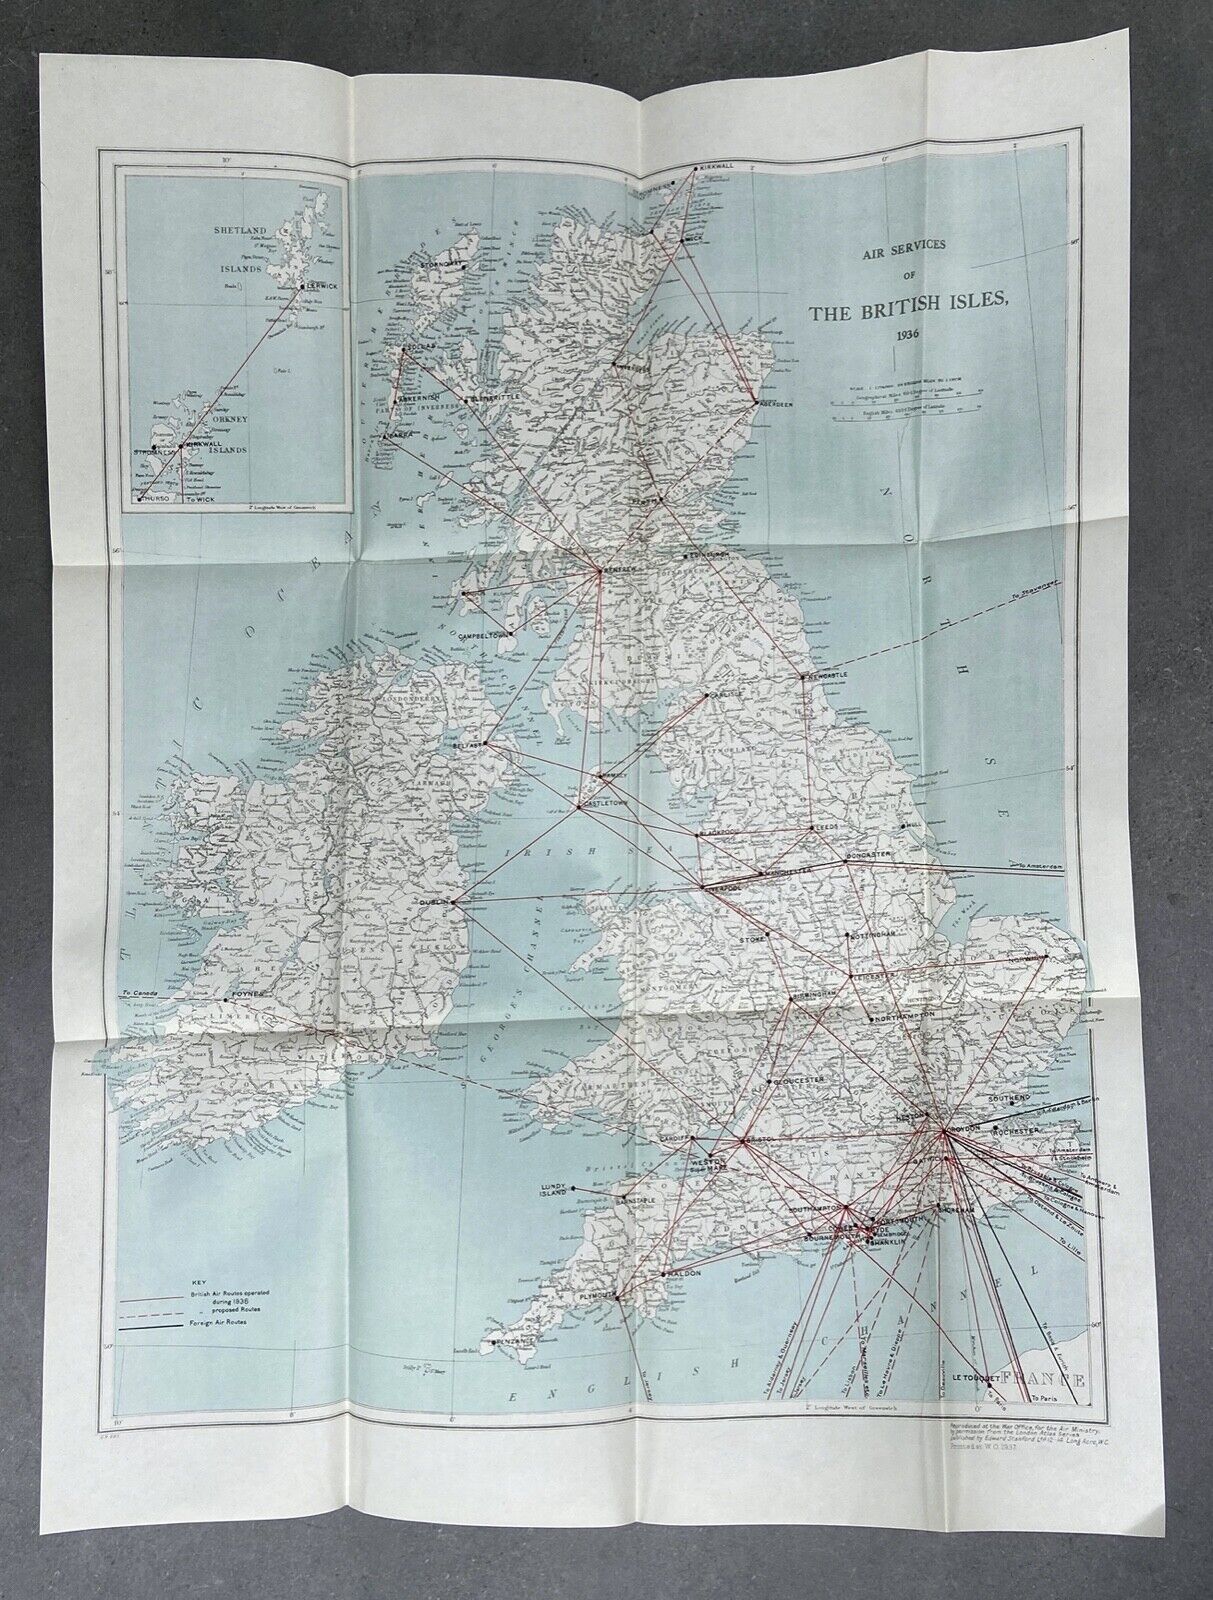 AIR SERVICES OF THE BRITISH ISLES 1936 LARGE VINTAGE AVIATION AIRLINE ROUTE MAP